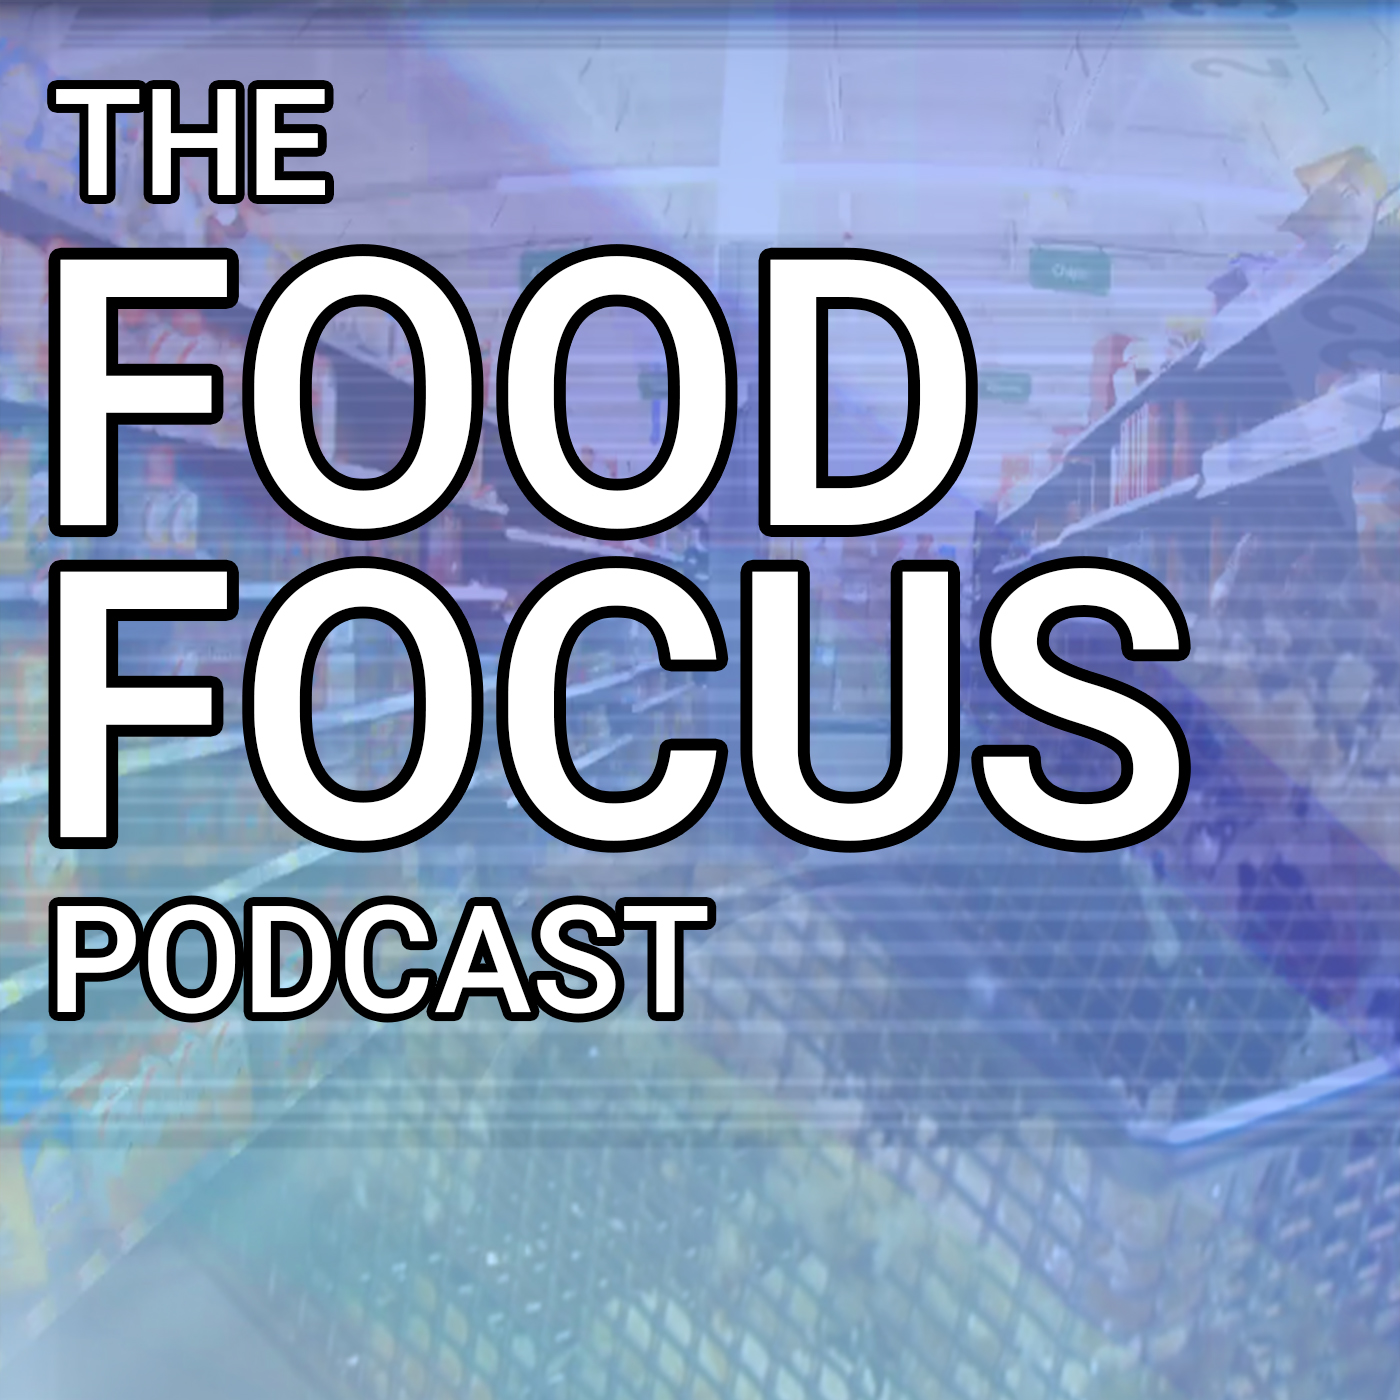 Food Focus 8/31/17 – Smucker’s Folgers Problem, Dominos Partners with Ford